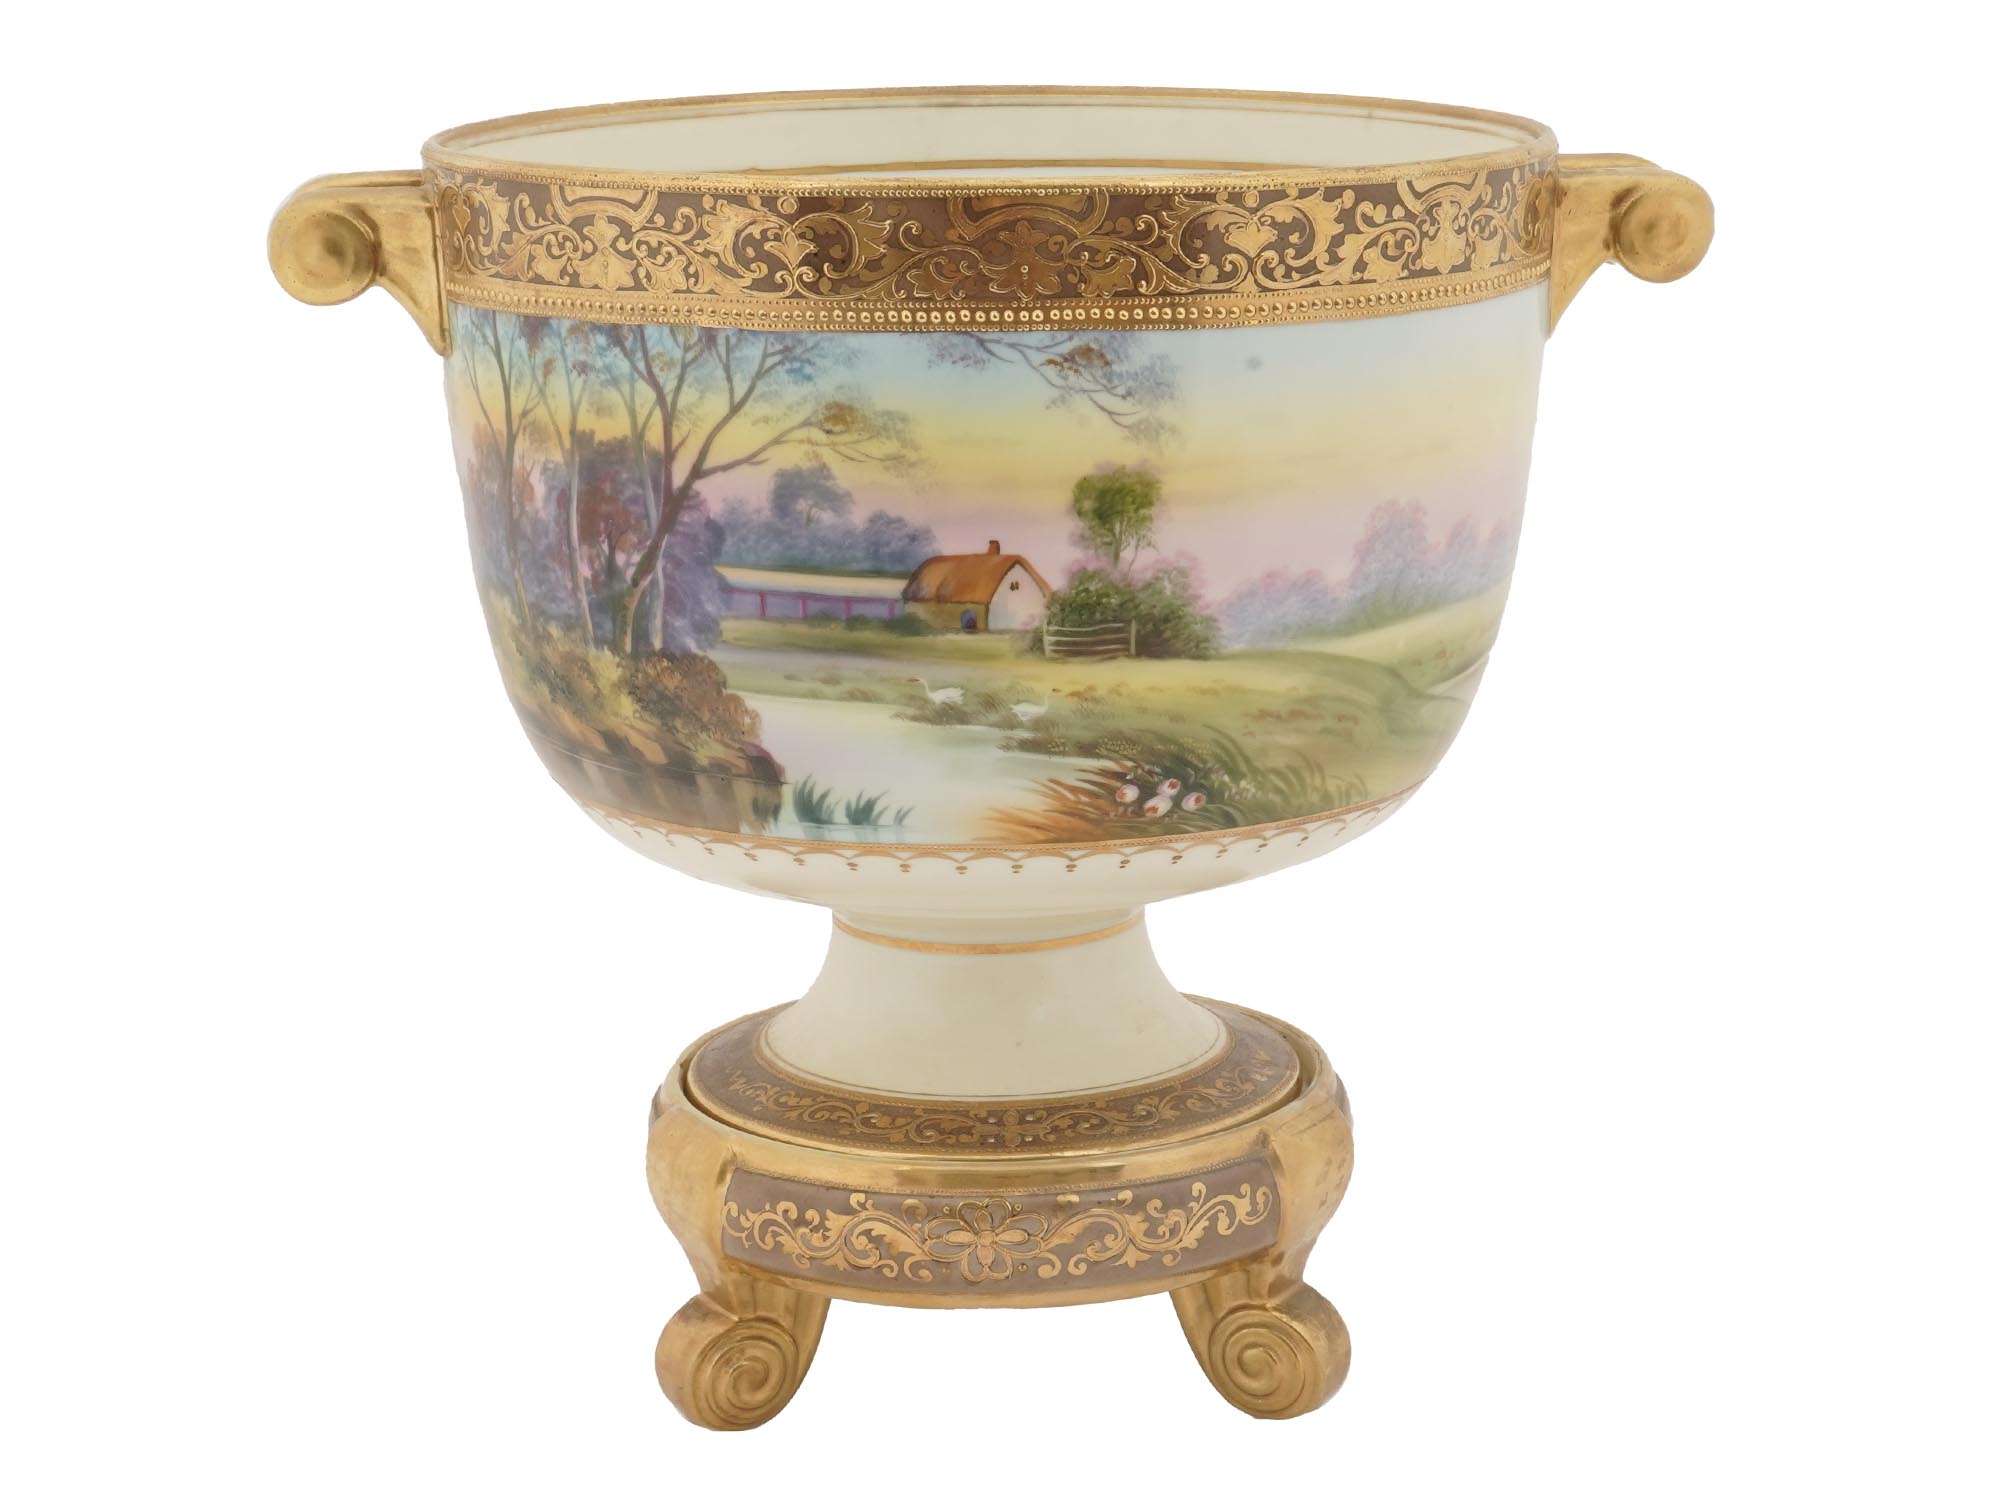 NIPPON WARE GILT PORCELAIN FLOWER POT WITH STAND PIC-0